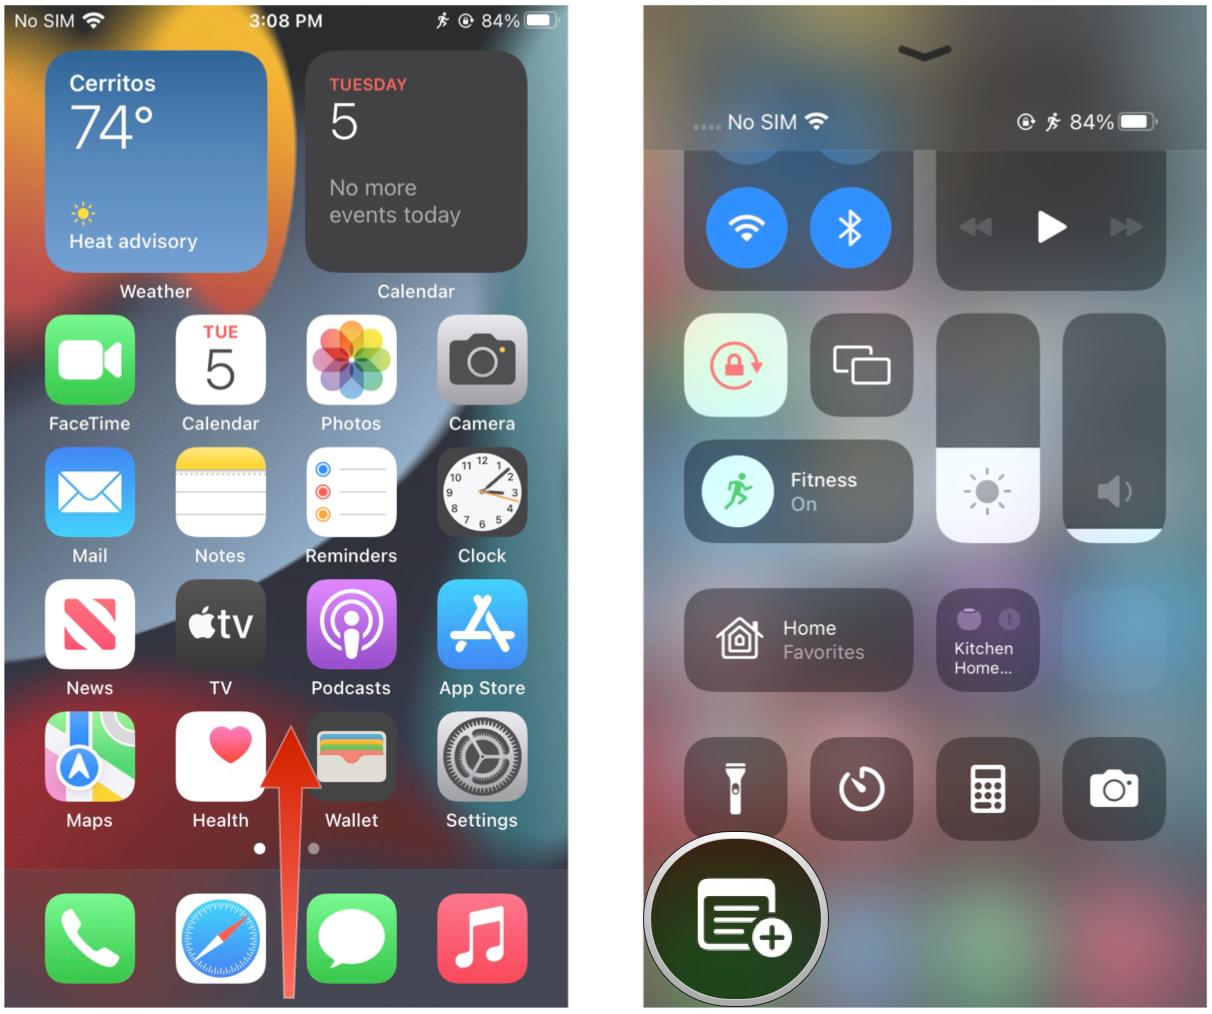 Access Instant Notes on iPhone with Home button: Swipe up from bottom of screen to invoke Control Center, then tap the Notes icon